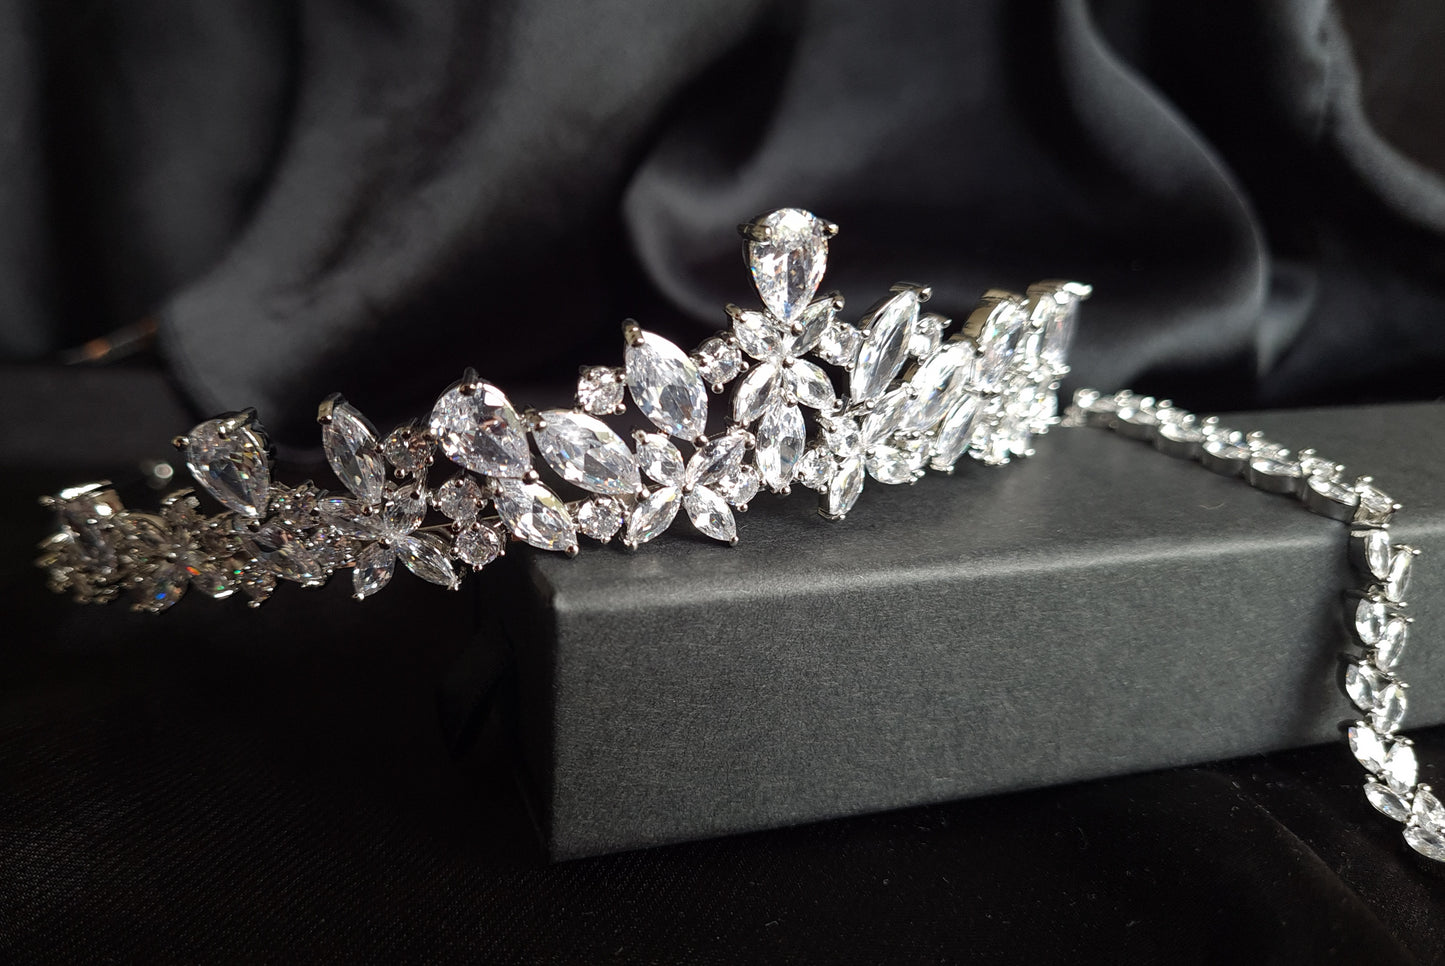 A tiara with diamonds on a black background. The tiara is made of silver and features a delicate design with cascading diamonds. The diamonds are clear and sparkling. The tiara is sitting on a table. next to a bracelet.